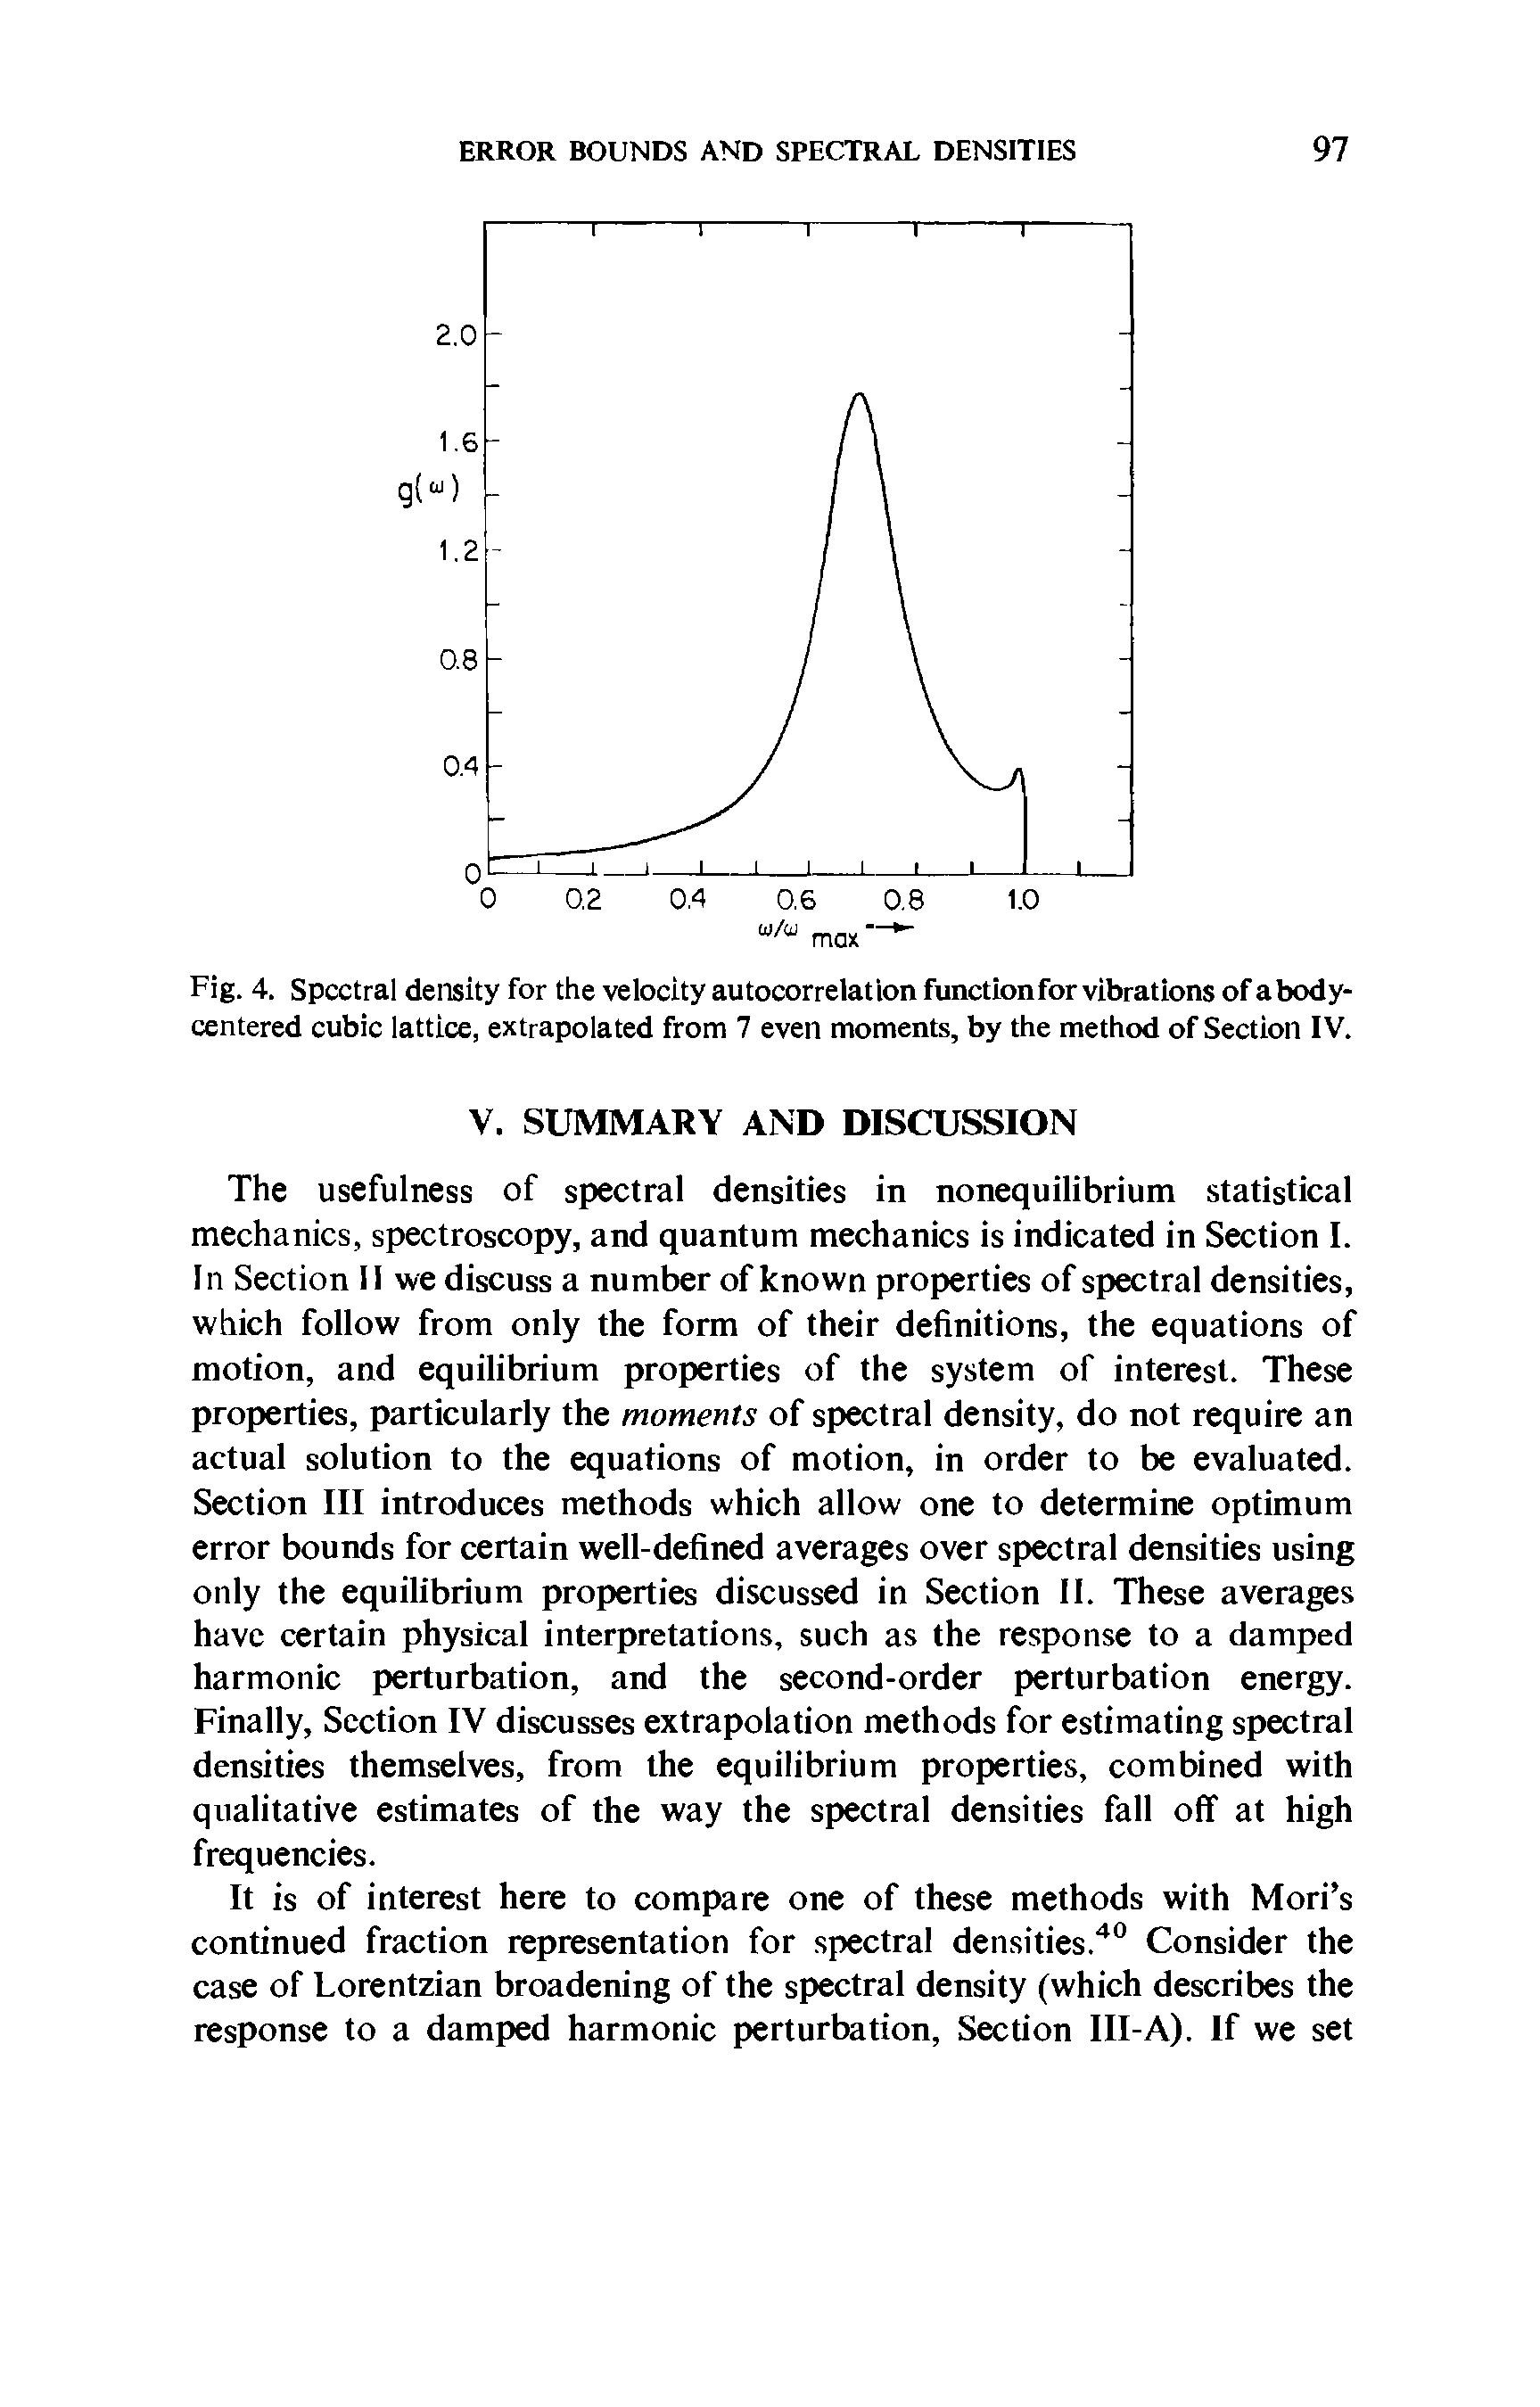 Fig. 4. Spectral density for the velocity autocorrelation function for vibrations of abody-centered cubic lattice, extrapolated from 7 even moments, by the method of Section IV.